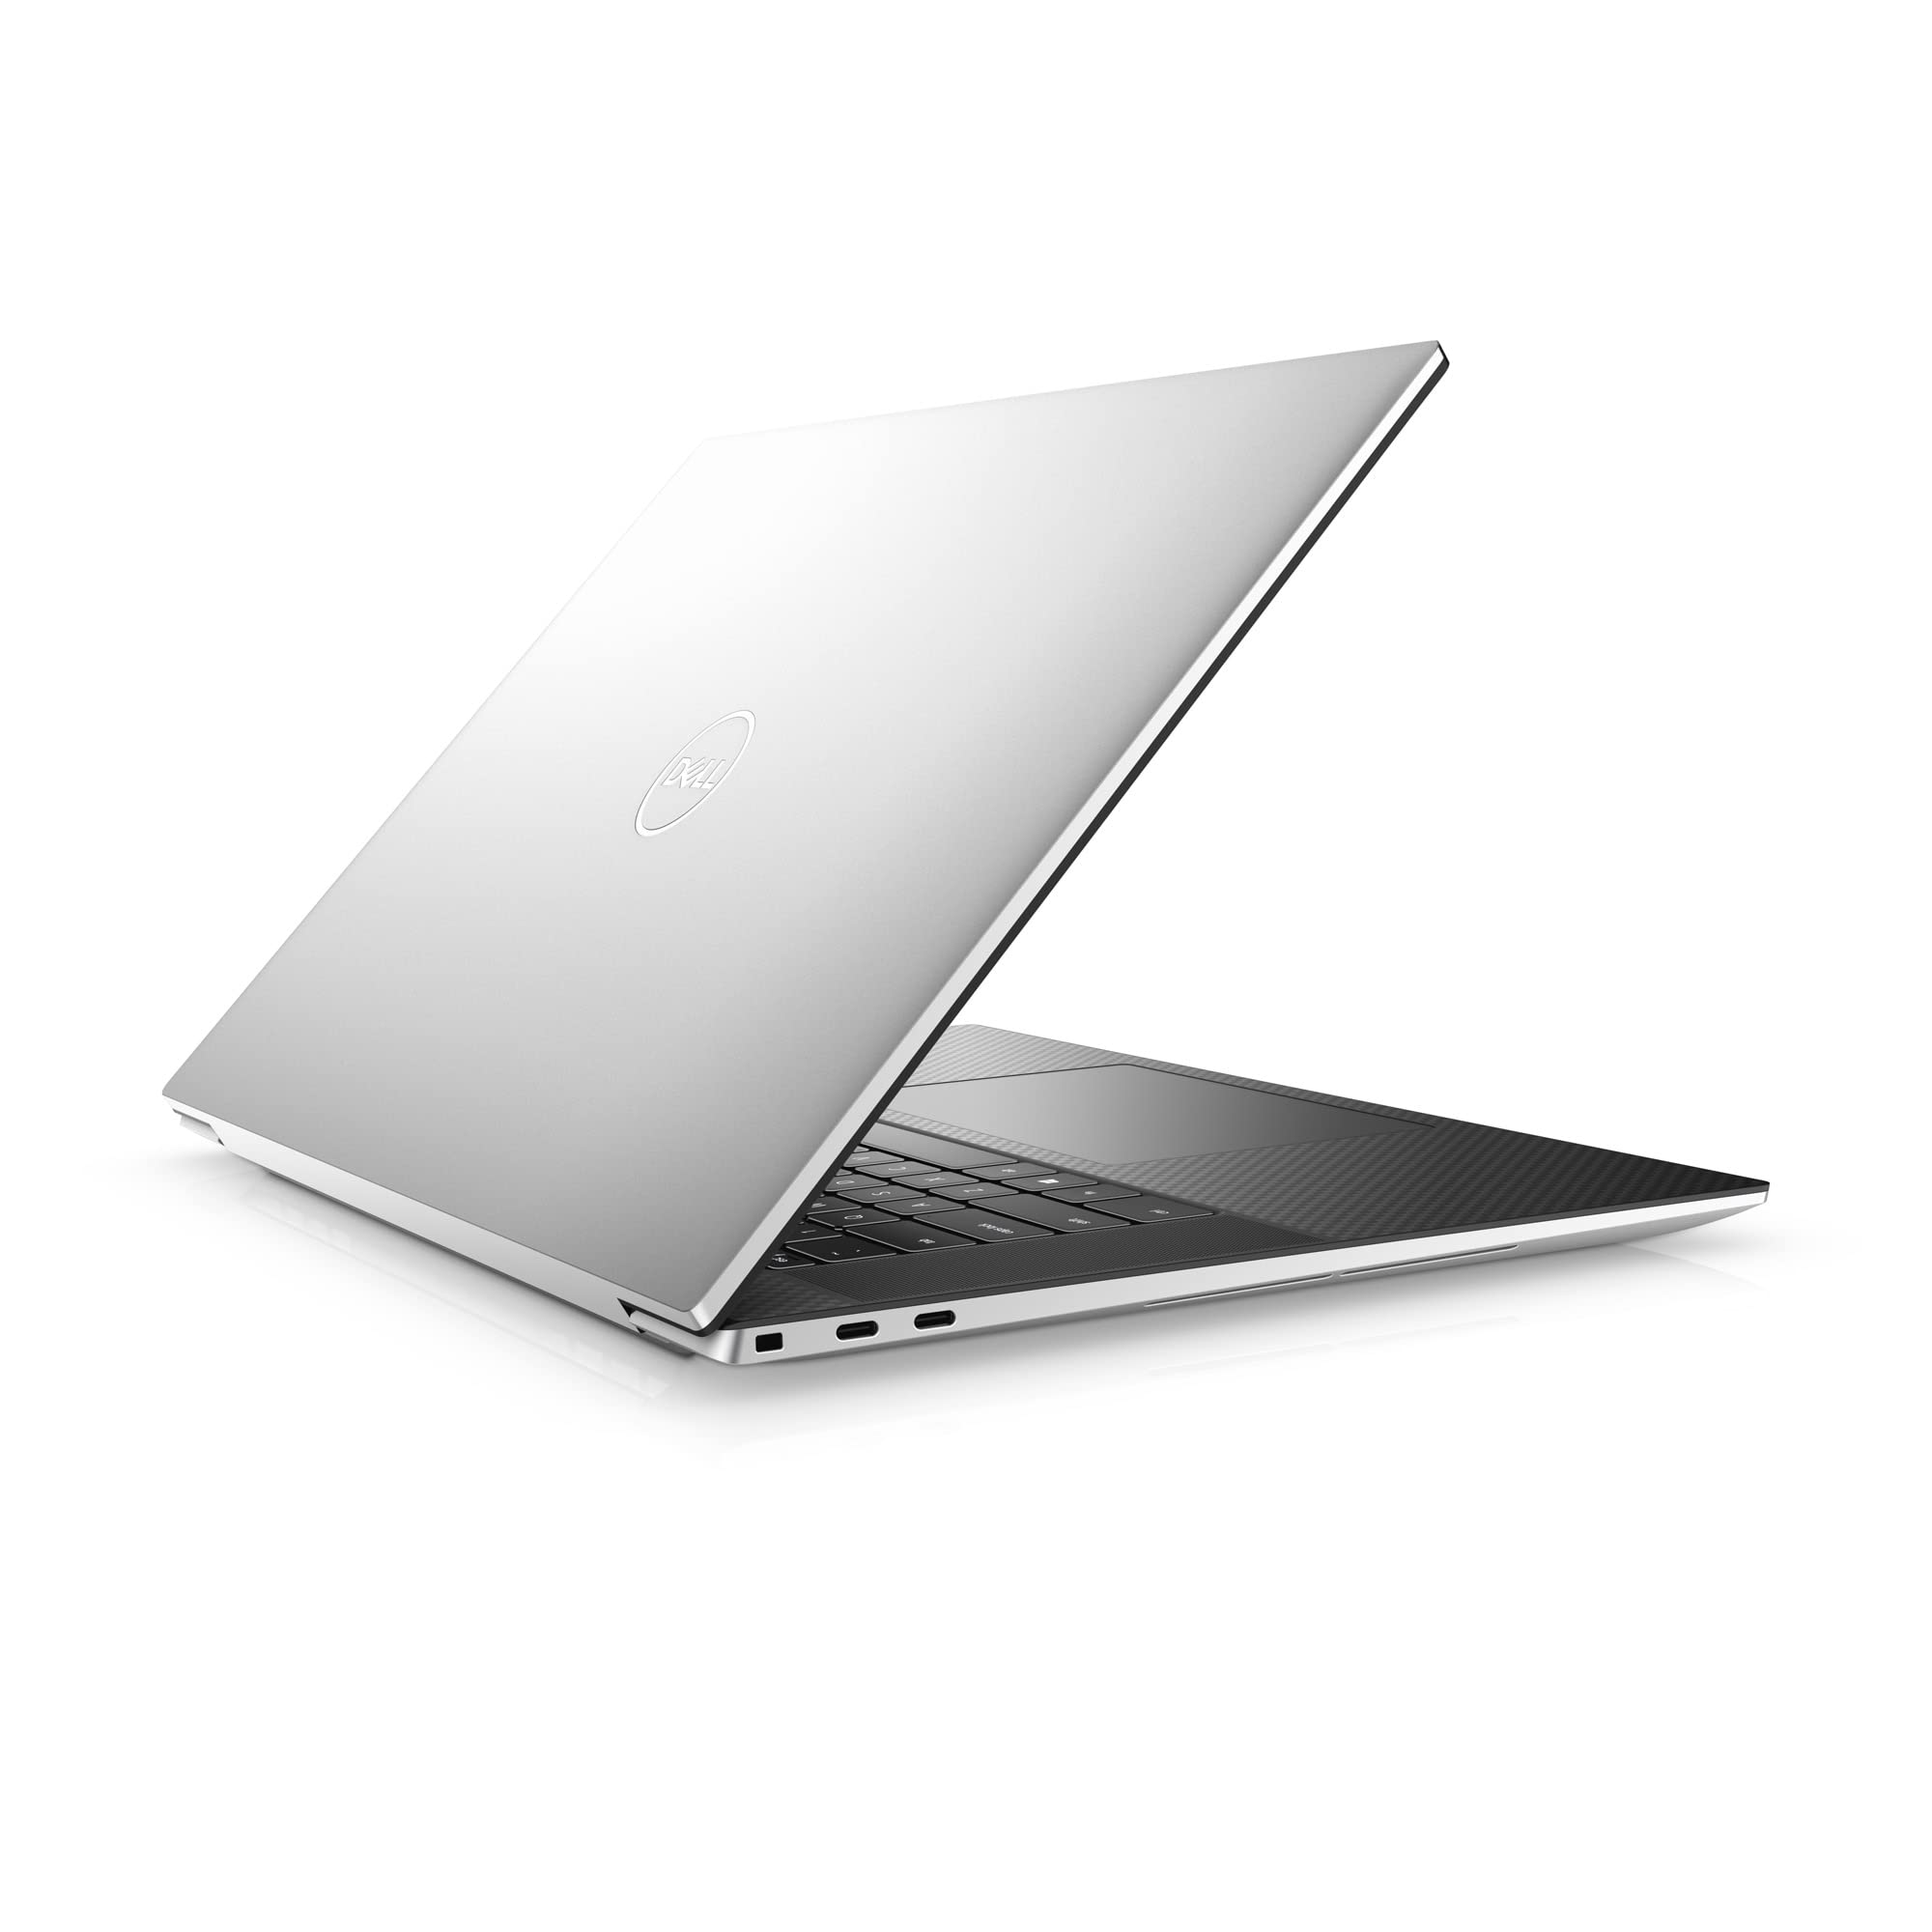 Dell XPS 17 9710, 17 inch UHD+ Touchscreen Laptop - Intel Core i9-11900H, 32GB DDR4 RAM, 1TB SSD, NVIDIA GeForce RTX 3060 6GB GDDR6, Windows 11 Pro - Platinum Silver with Pro Support